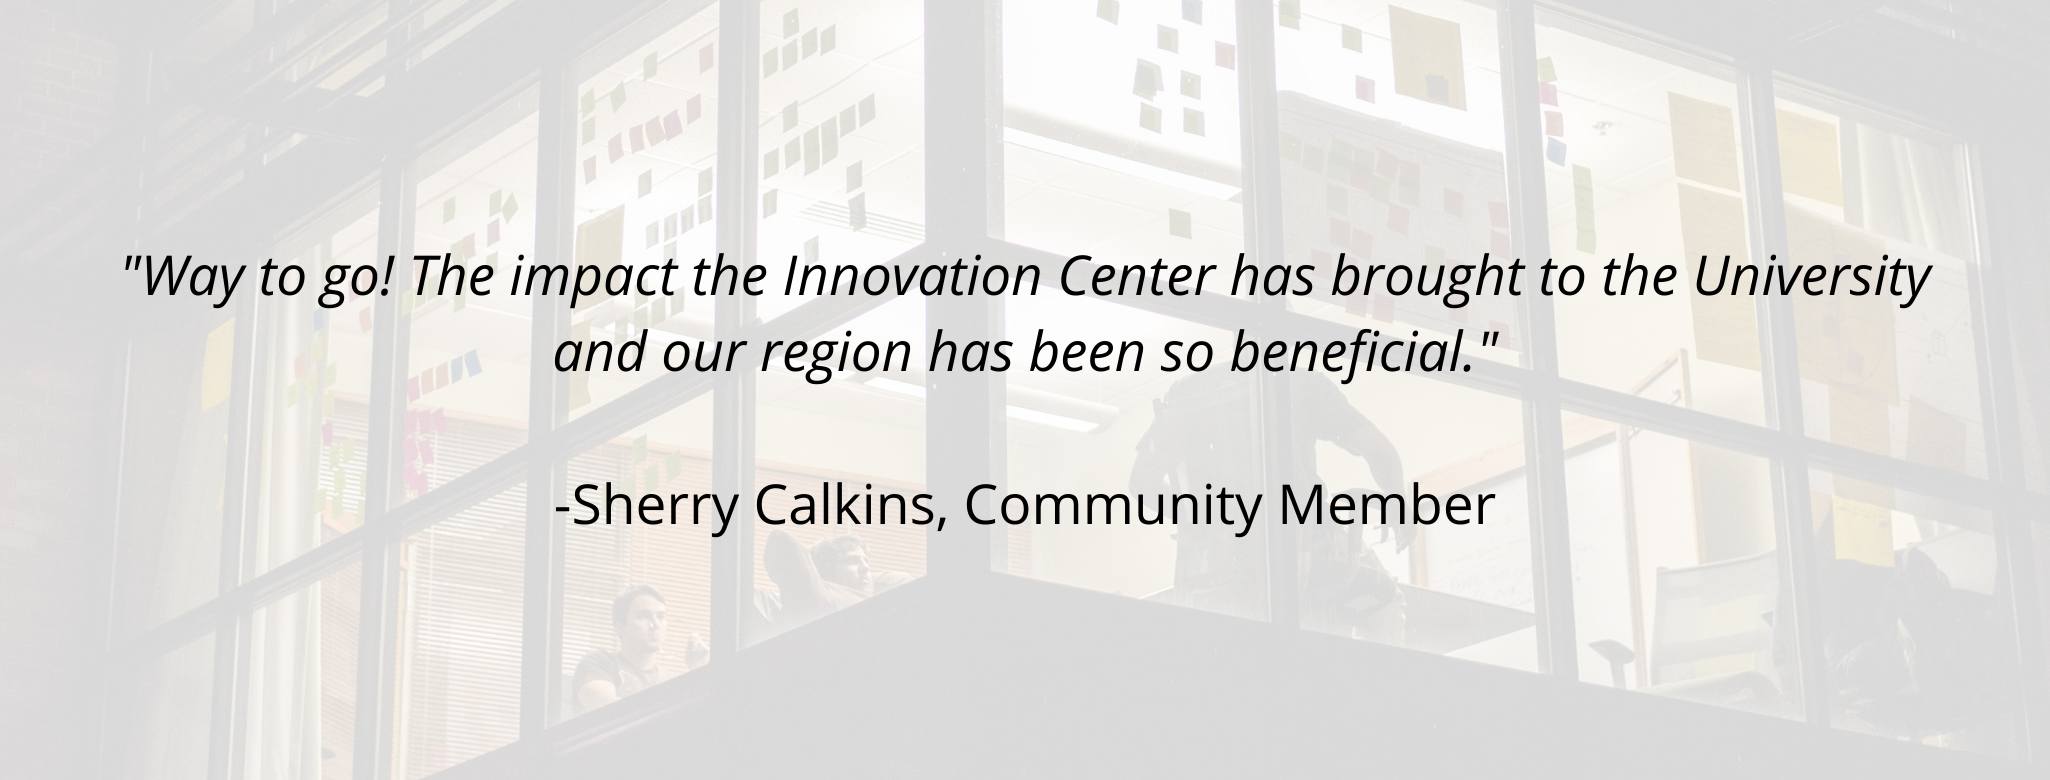 "Way to go! The impact the Innovation Center has brought to the University and our region has been so beneficial."  -Sherry Calkins, Community Member